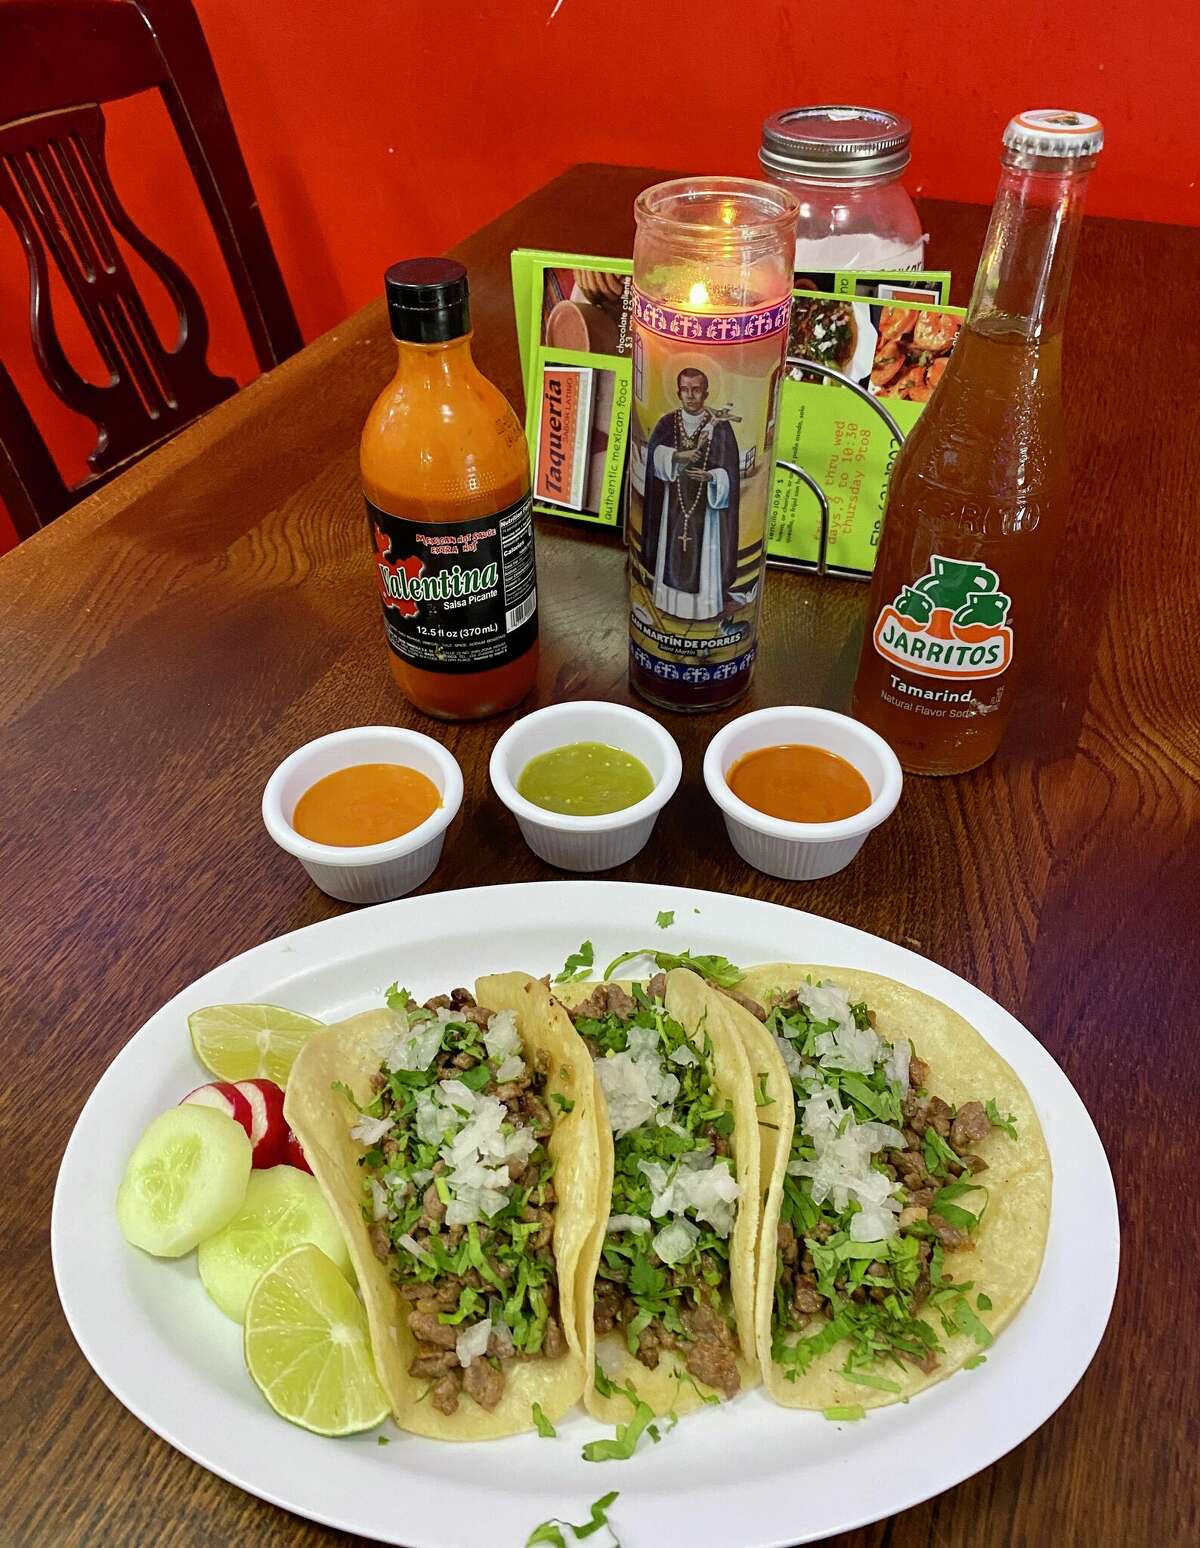 In the foreground, three tacos with meat, onion and cilantro sit on a white plate with sliced limes, cucumber and radishes. Behind the plate are three white dishes of sauces, a jarritos soda, a bottle of Salsa Valentina and a prayer candle. A menu and a jar can be seen in the background.